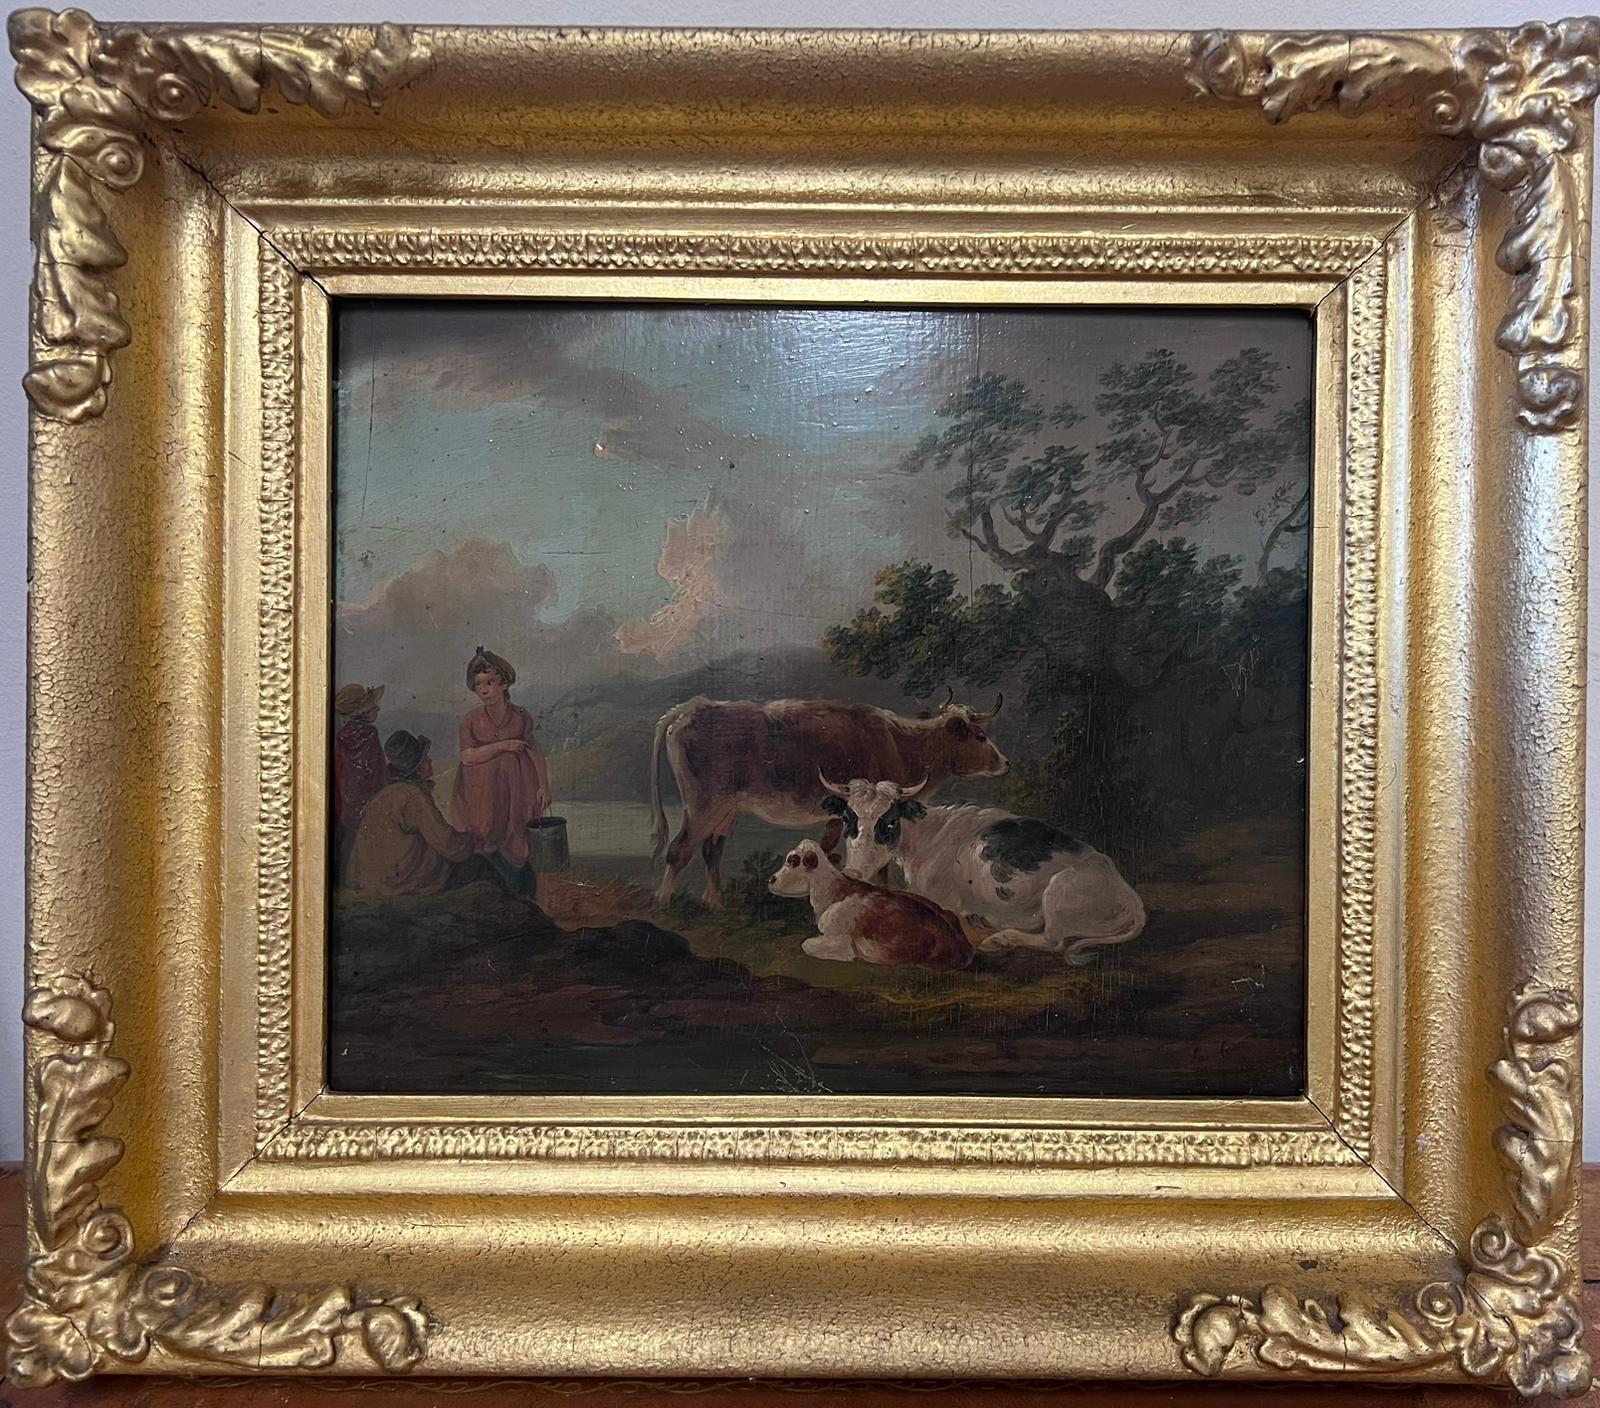 c. 1800 Shepherd & Milk Maid with Cattle Pastoral Landscape Oil on Wood Panel